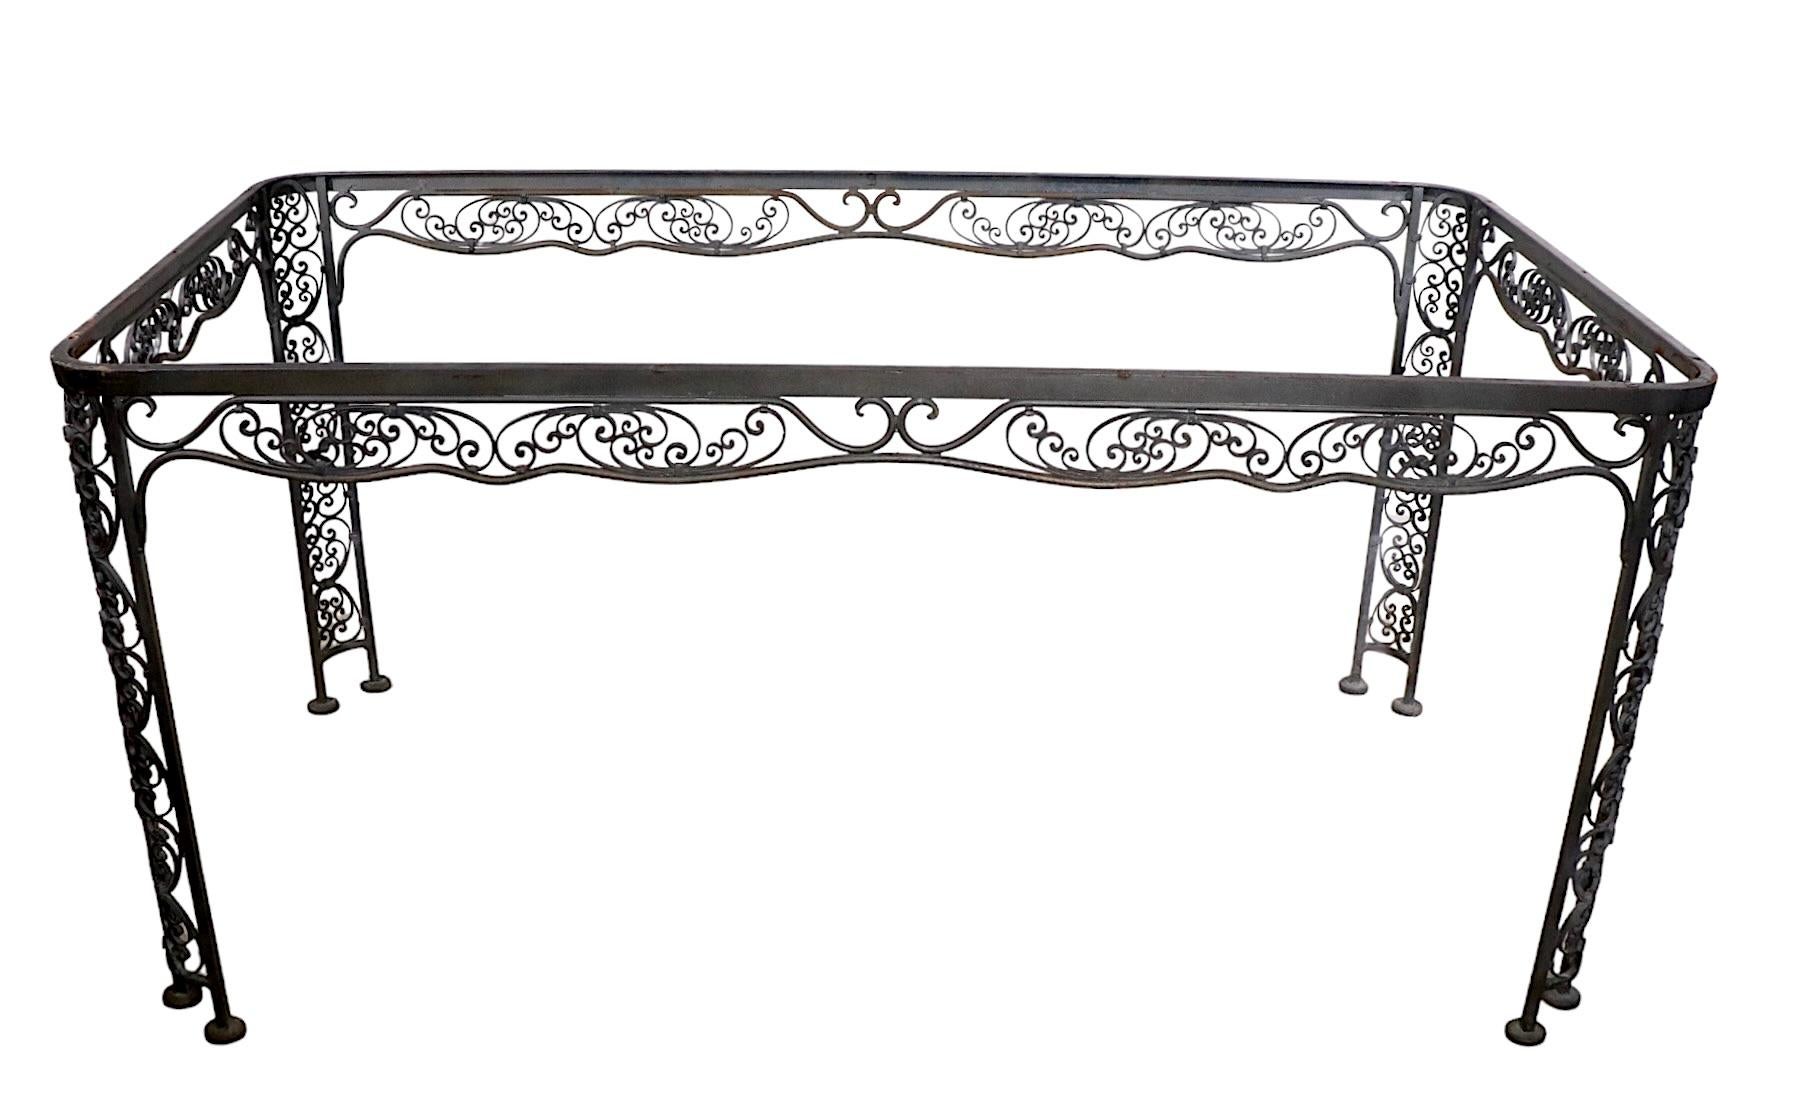 Ornate Wrought Iron Garden Patio Poolside Dining Table by Lee Woodard, c 1940's For Sale 9